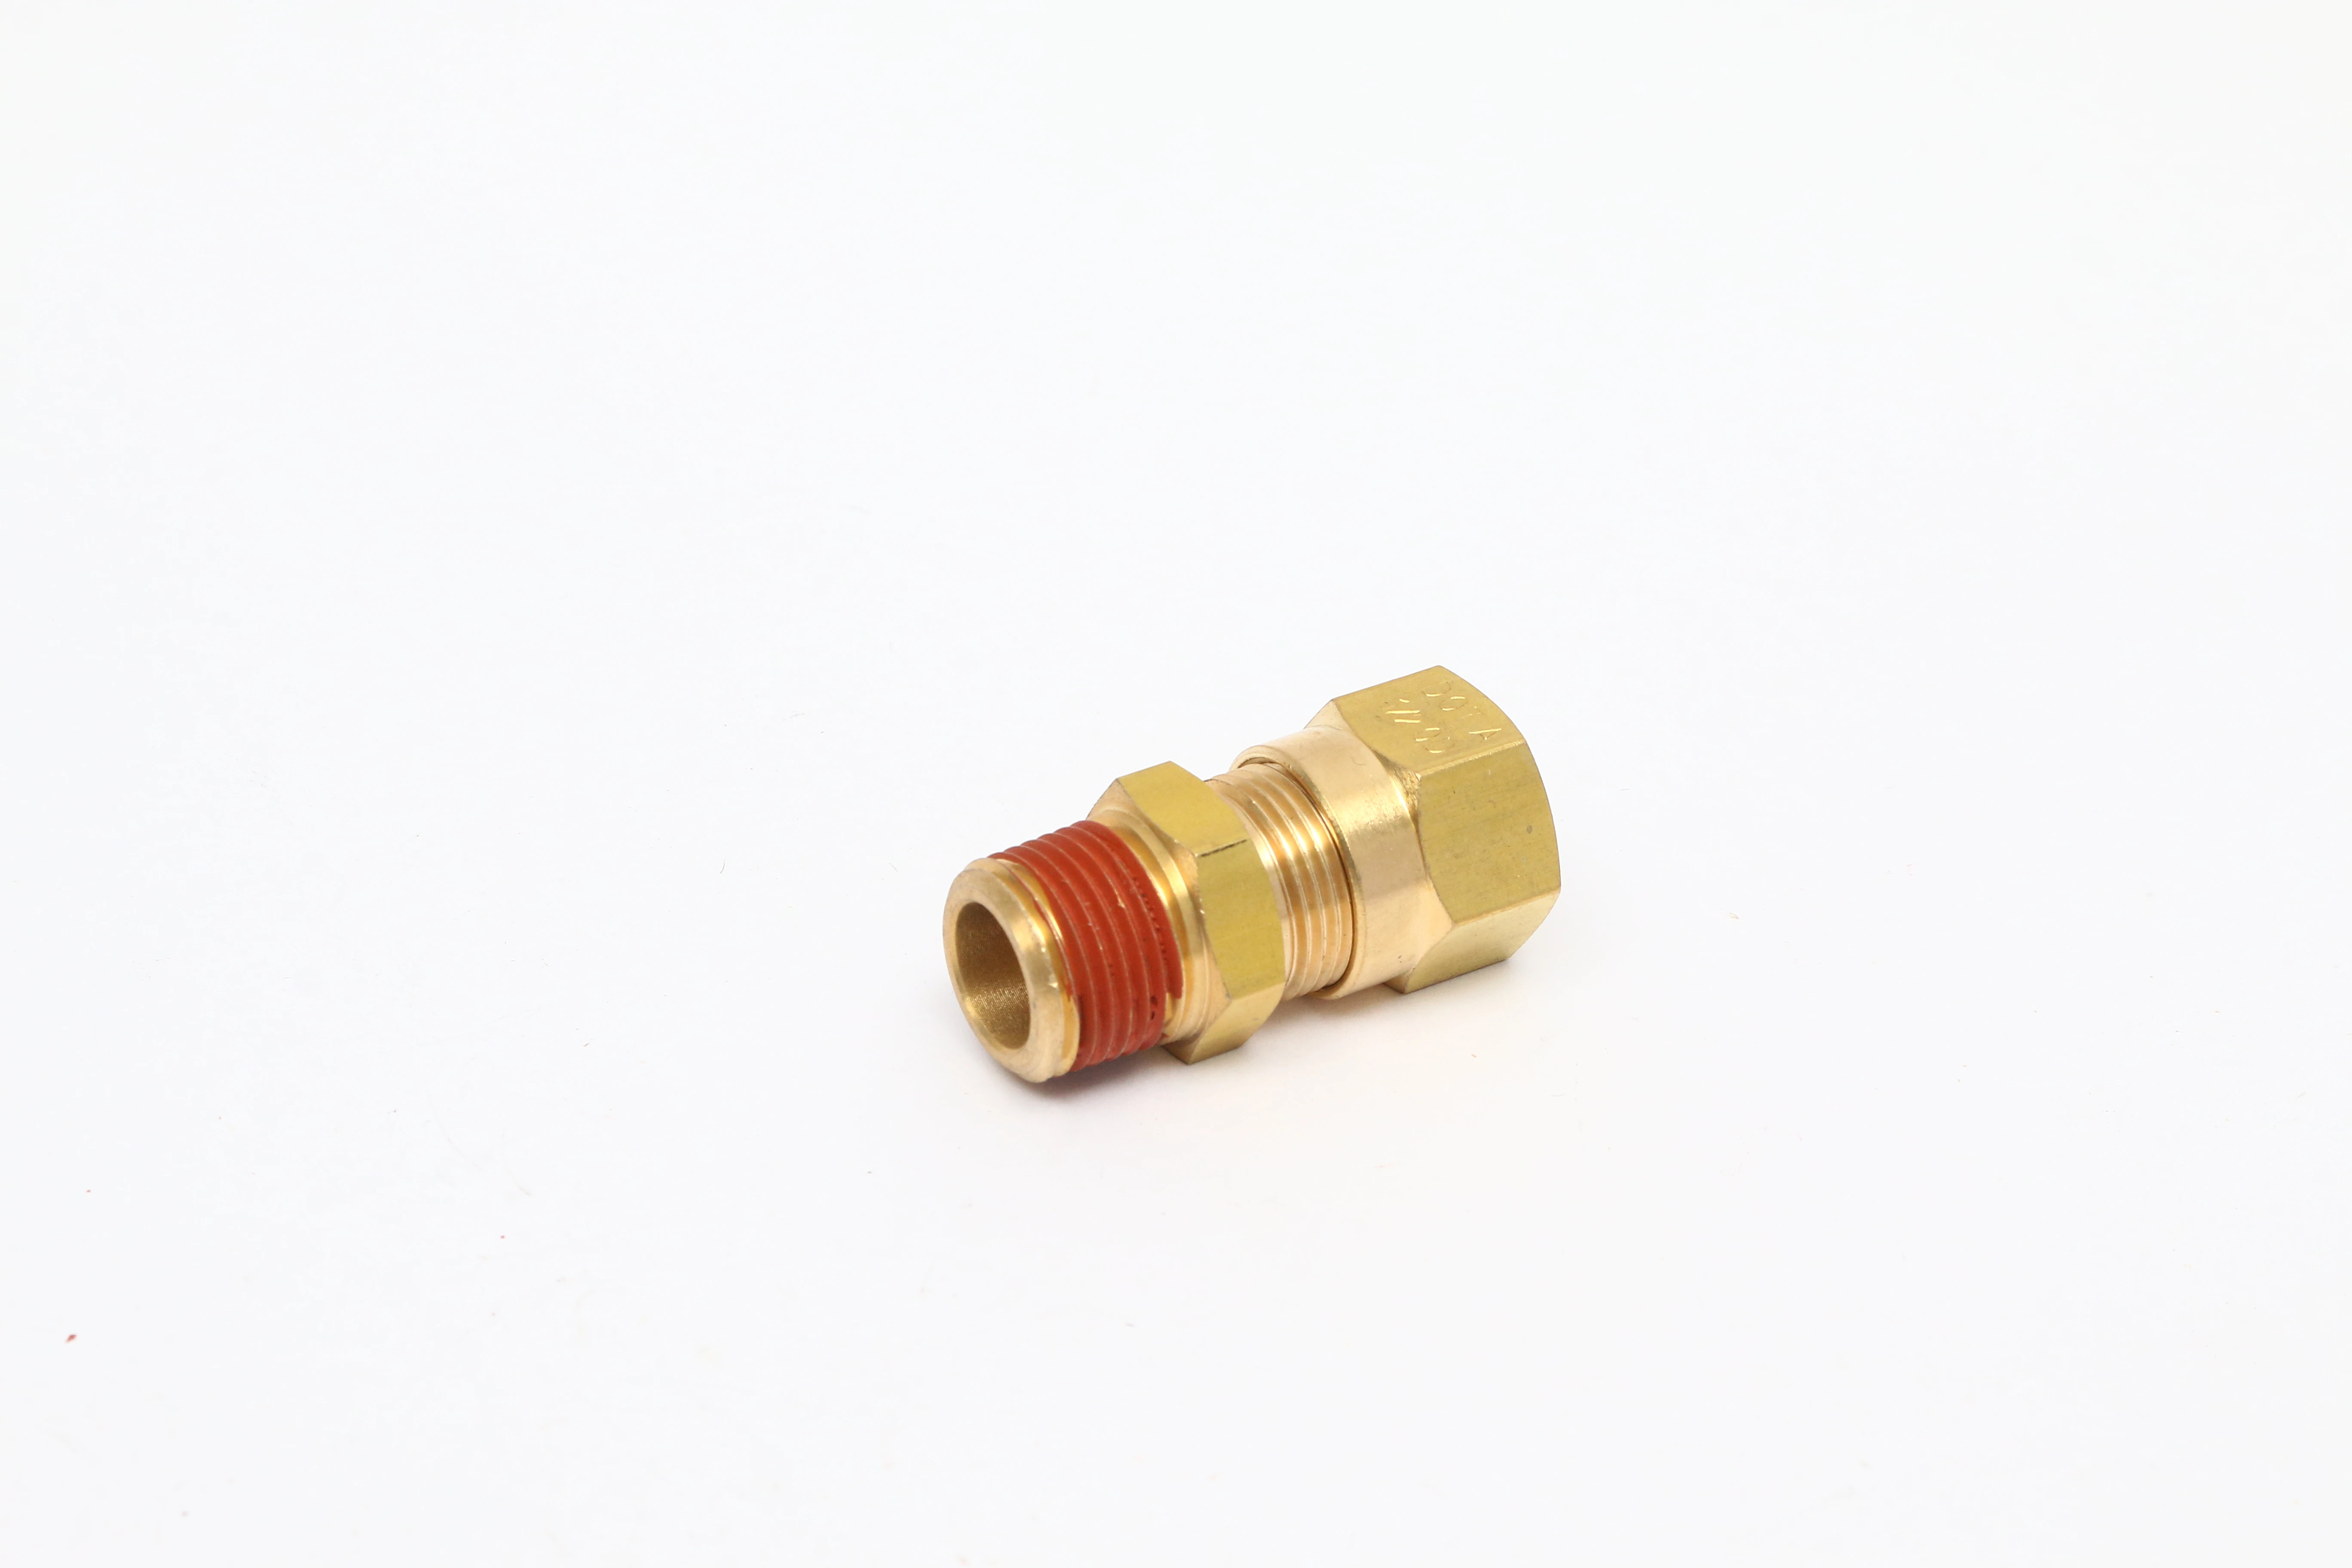 Hot selling good quality pipe fitting NPT DOT brass male thread straight ferrule dot copper connector